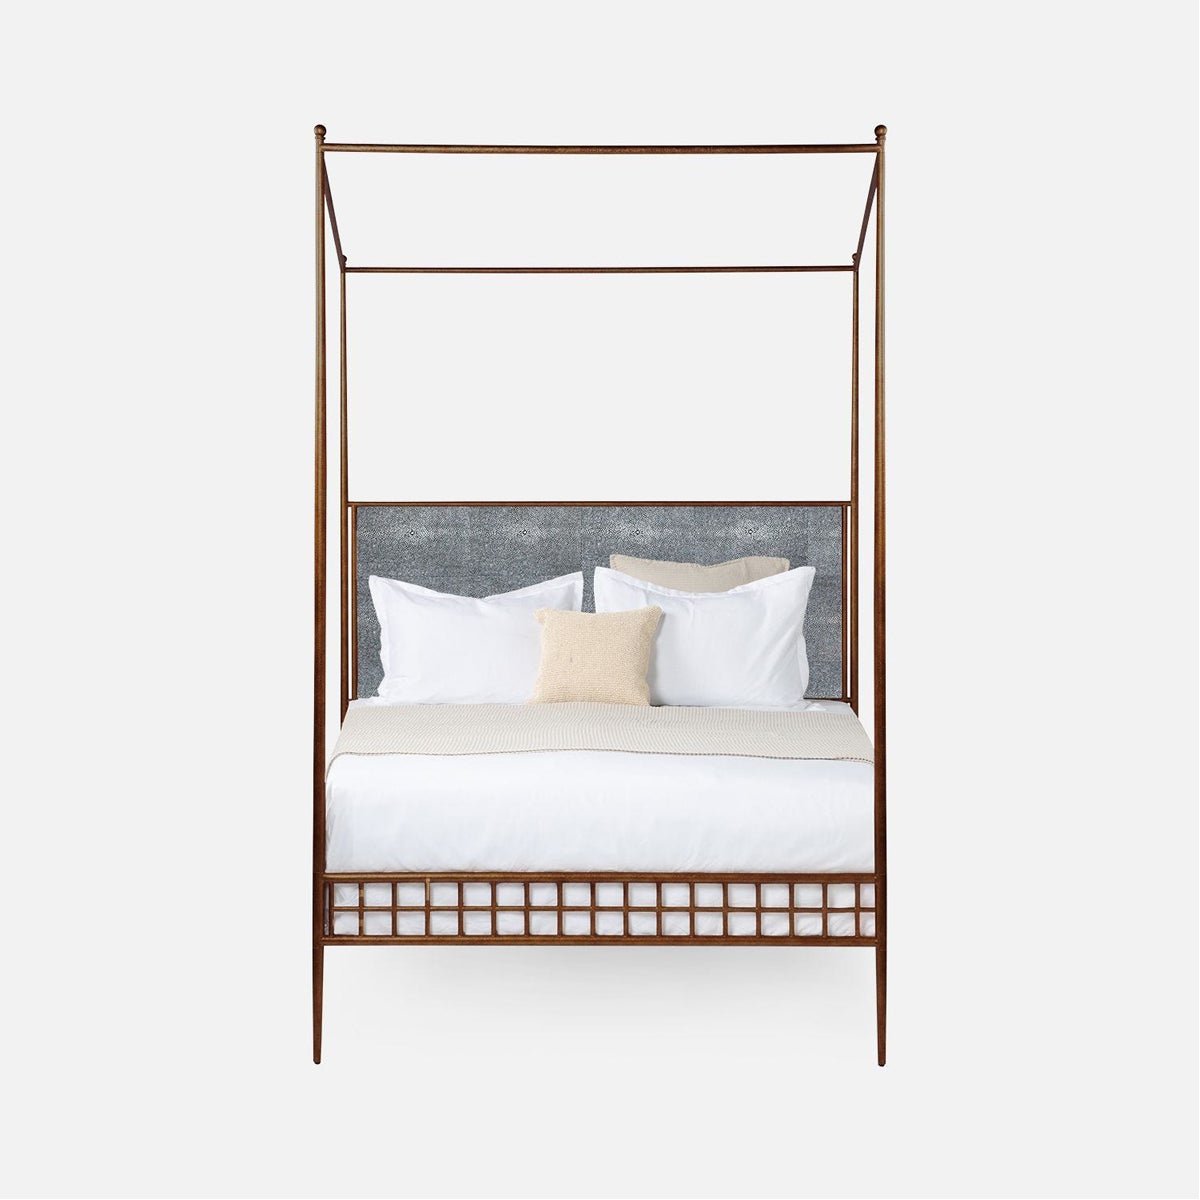 Made Goods Hamilton Textured Iron Canopy Bed in Ettrick Cotton Jute